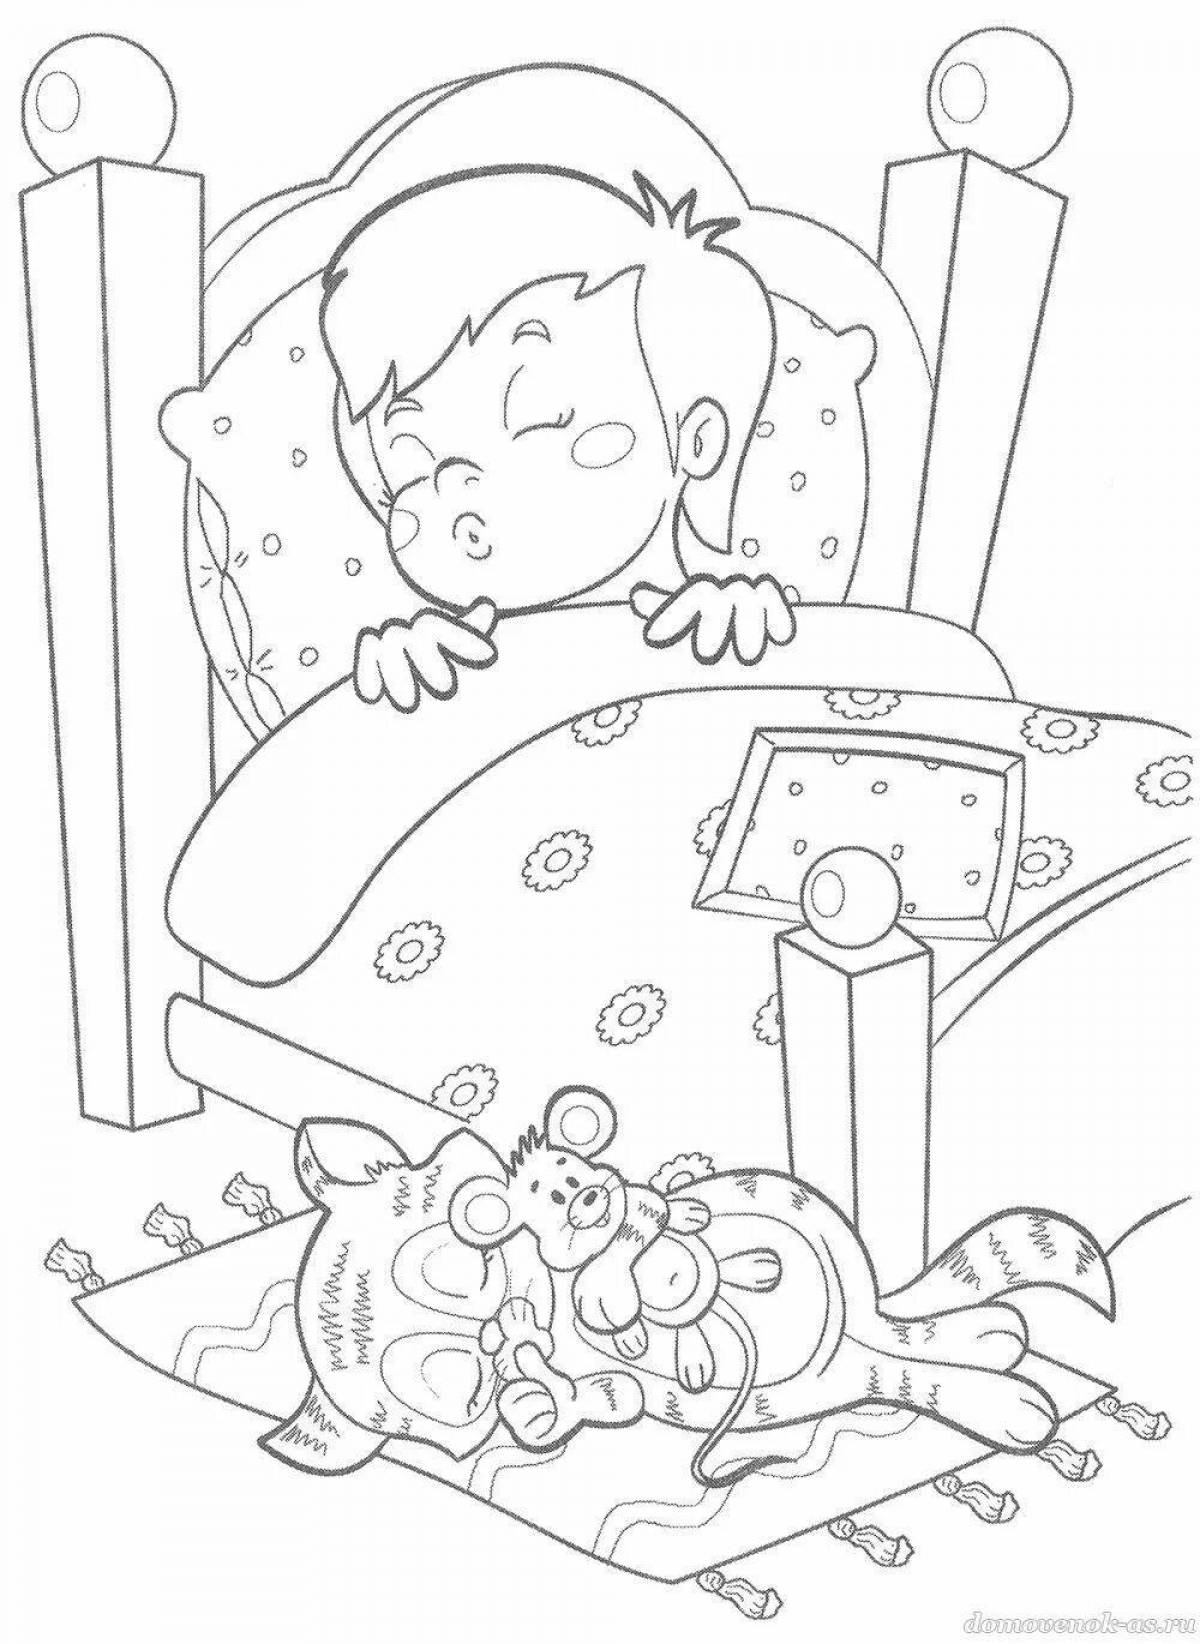 Sleeping baby coloring page